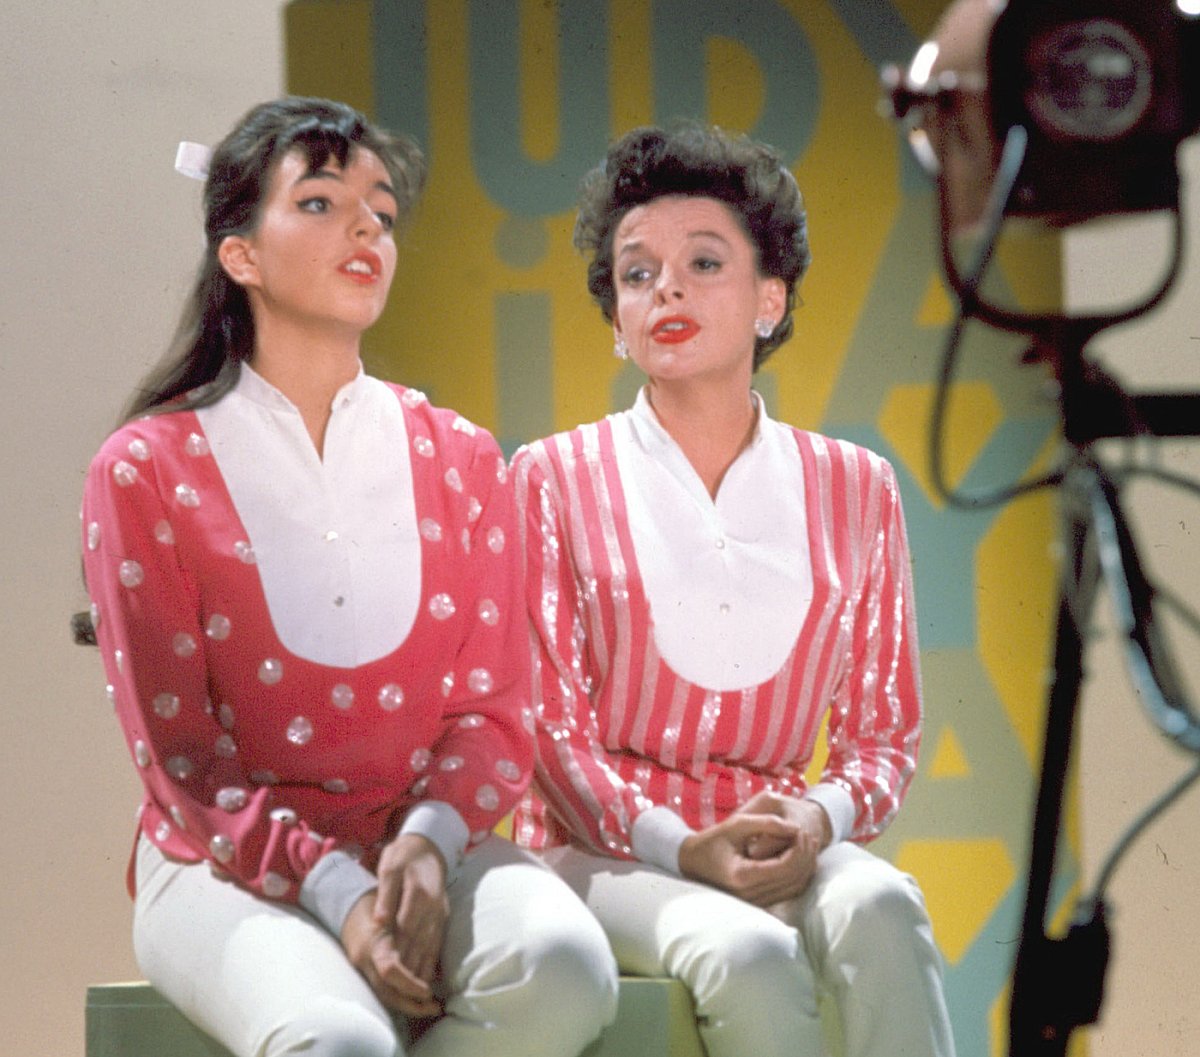 Judy Garland (R) and Liza Minnelli sing a duet on the set of the CBS music variety series 'The Judy Garland Show' on July 16, 1963.